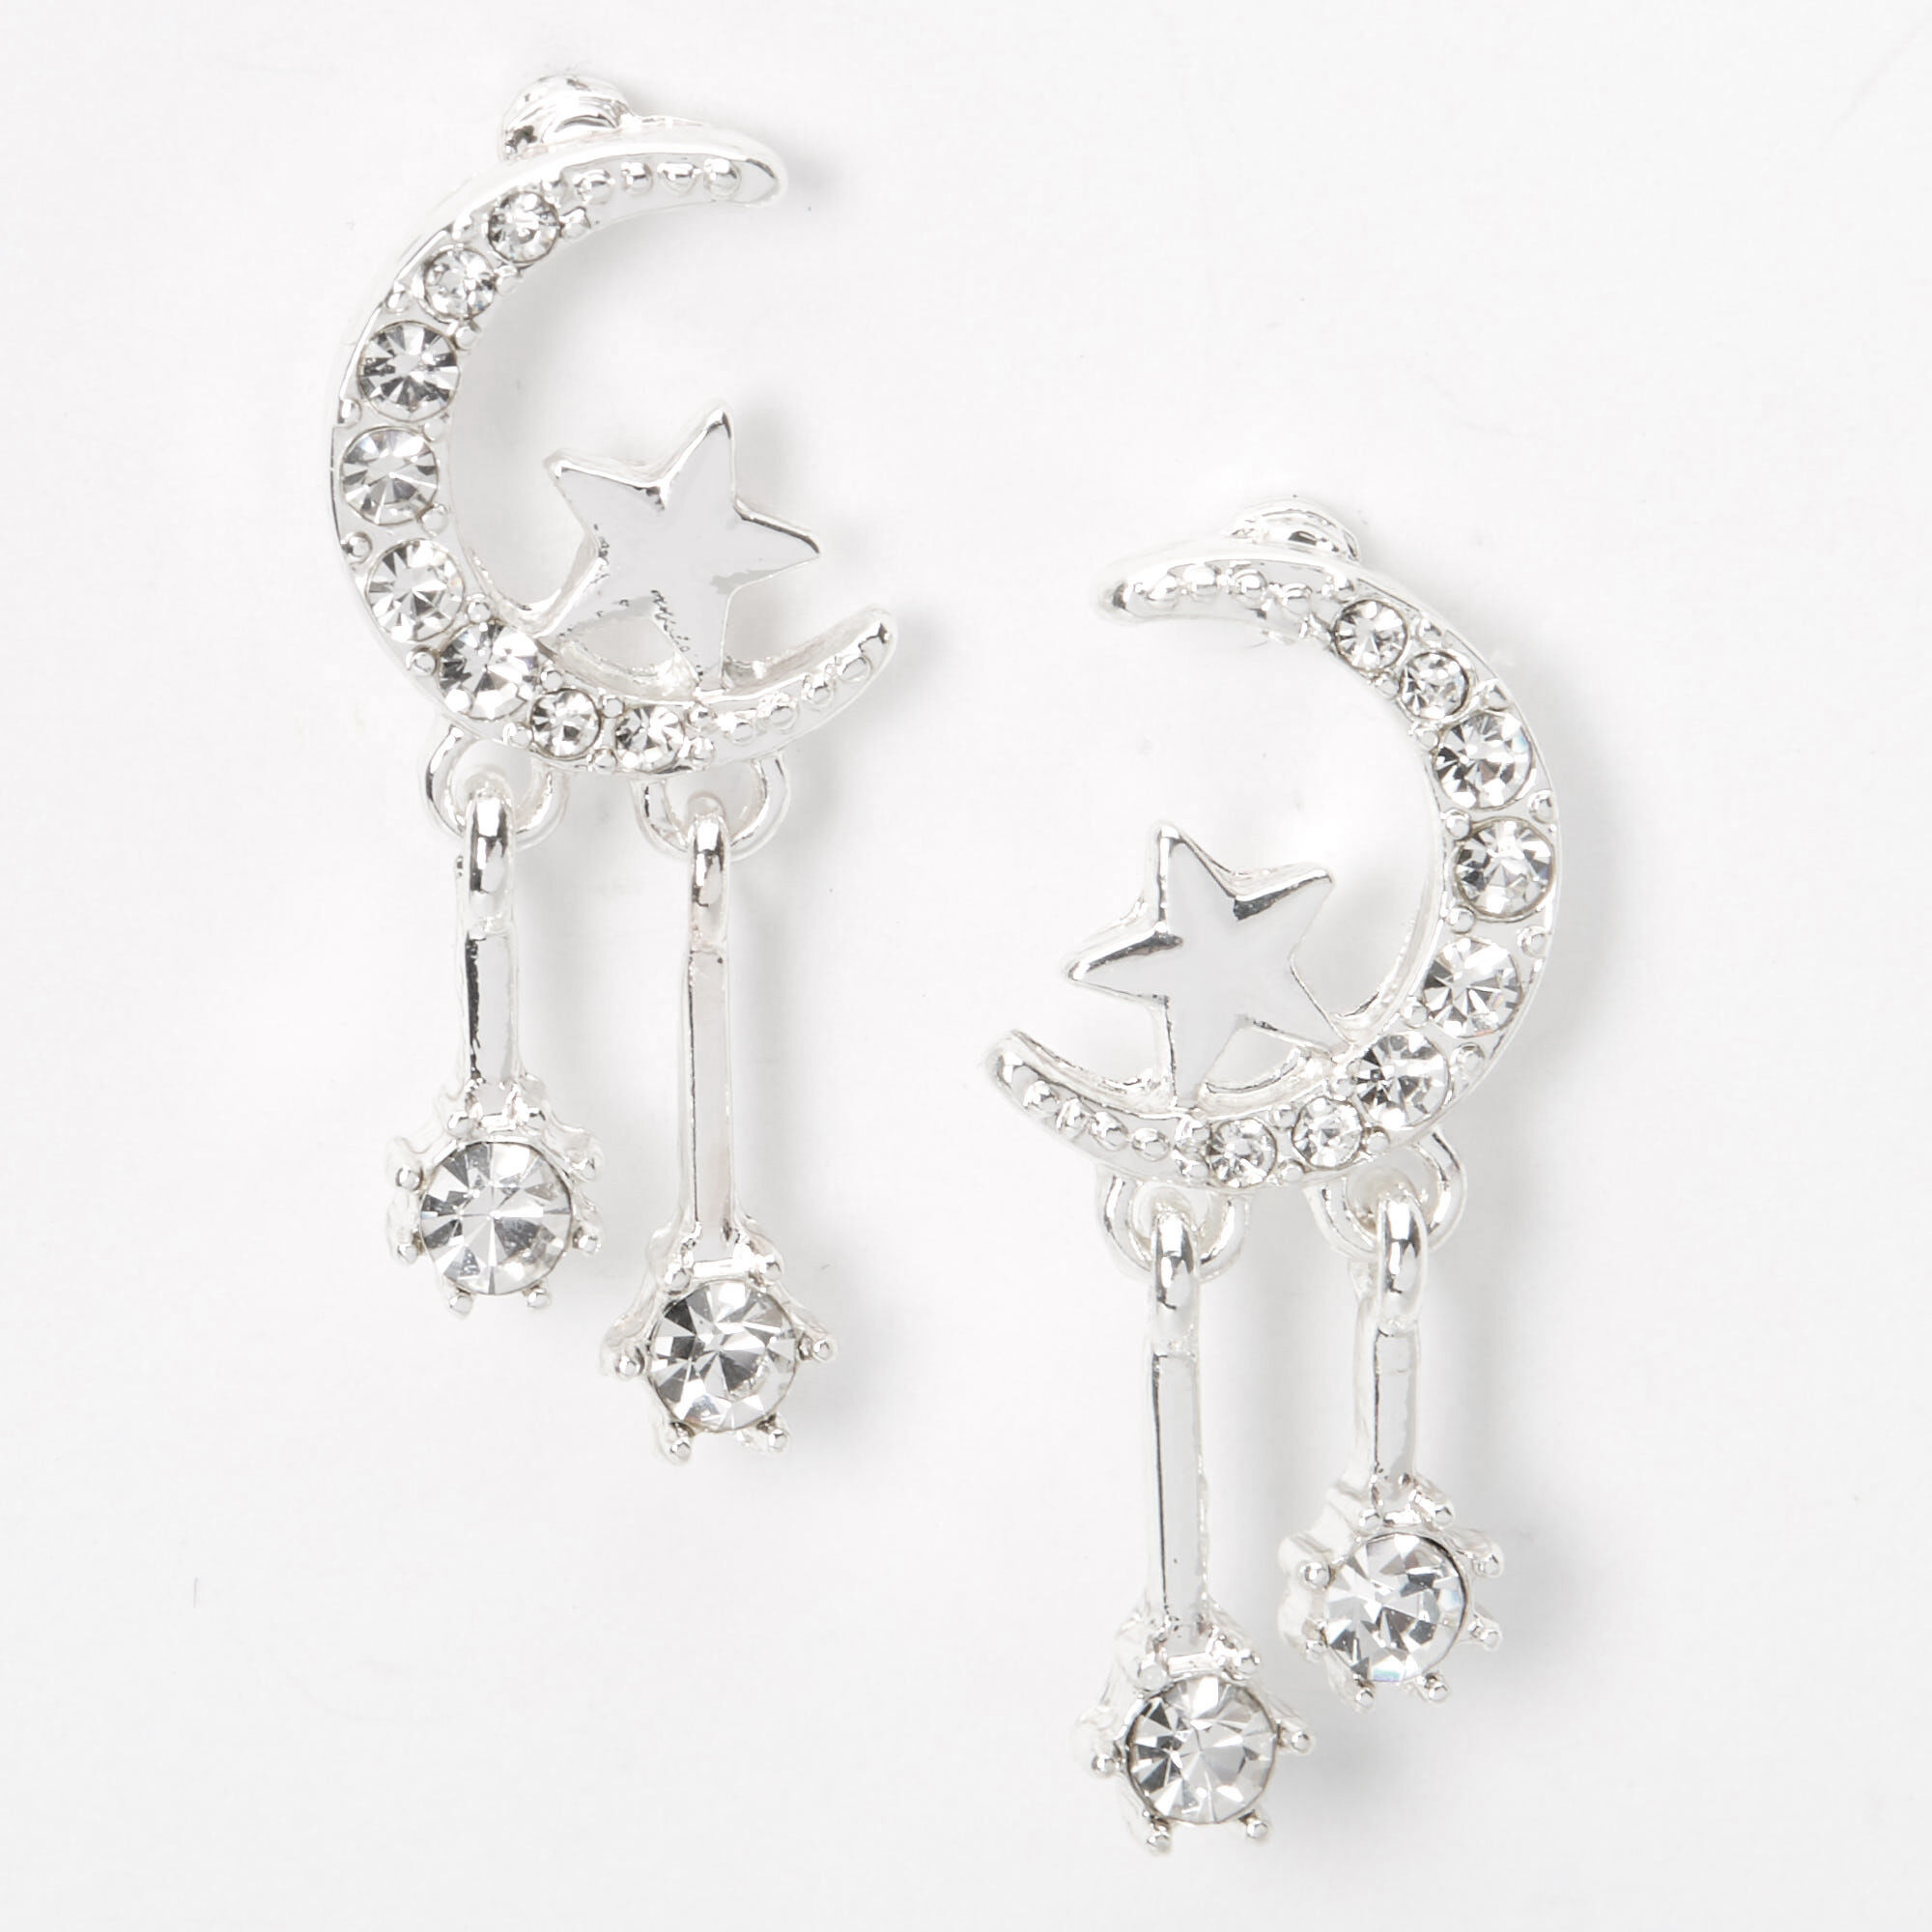 View Claires Tone 1 Celestial Drop Earrings Silver information